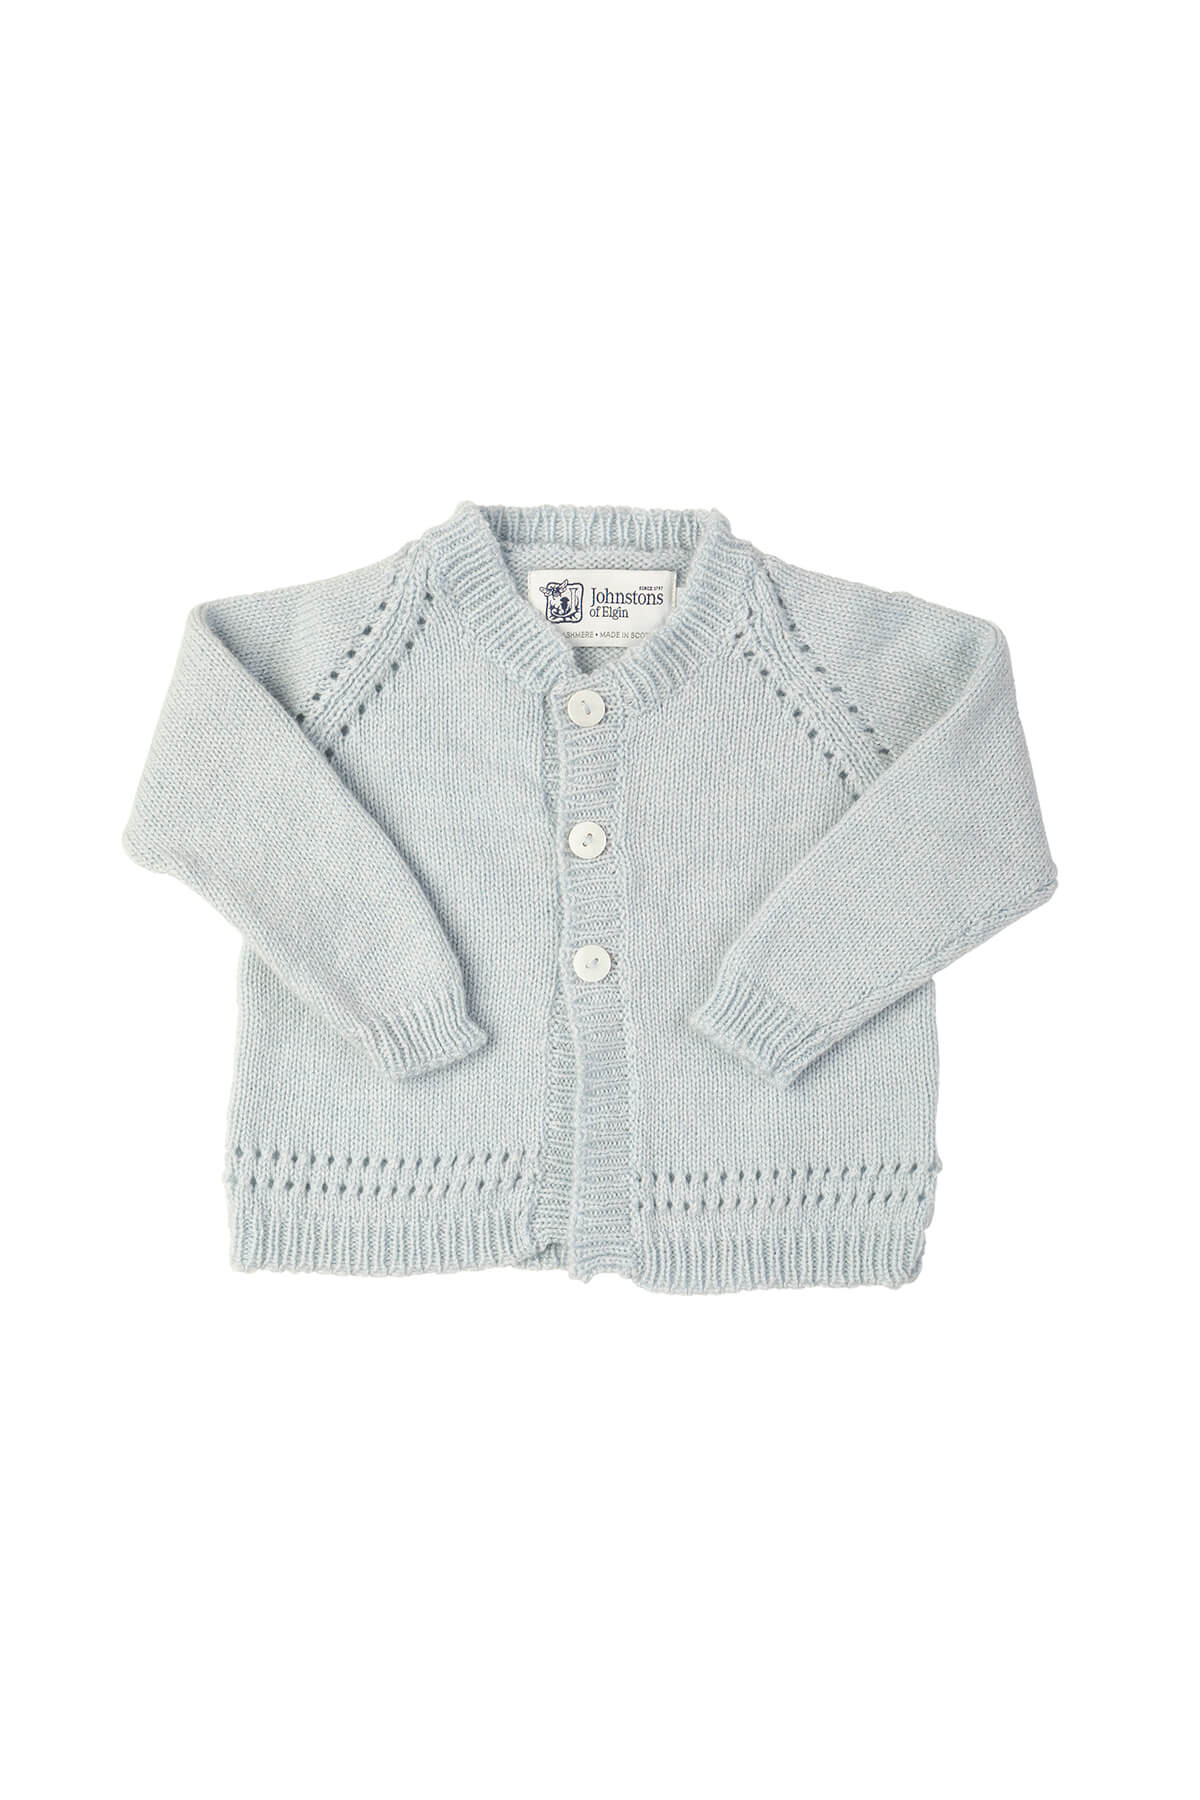 Johnstons of Elgin’s Baby's 1st Cashmere Cardigan in Powder Blue on a white background AW21GIFTSET19C